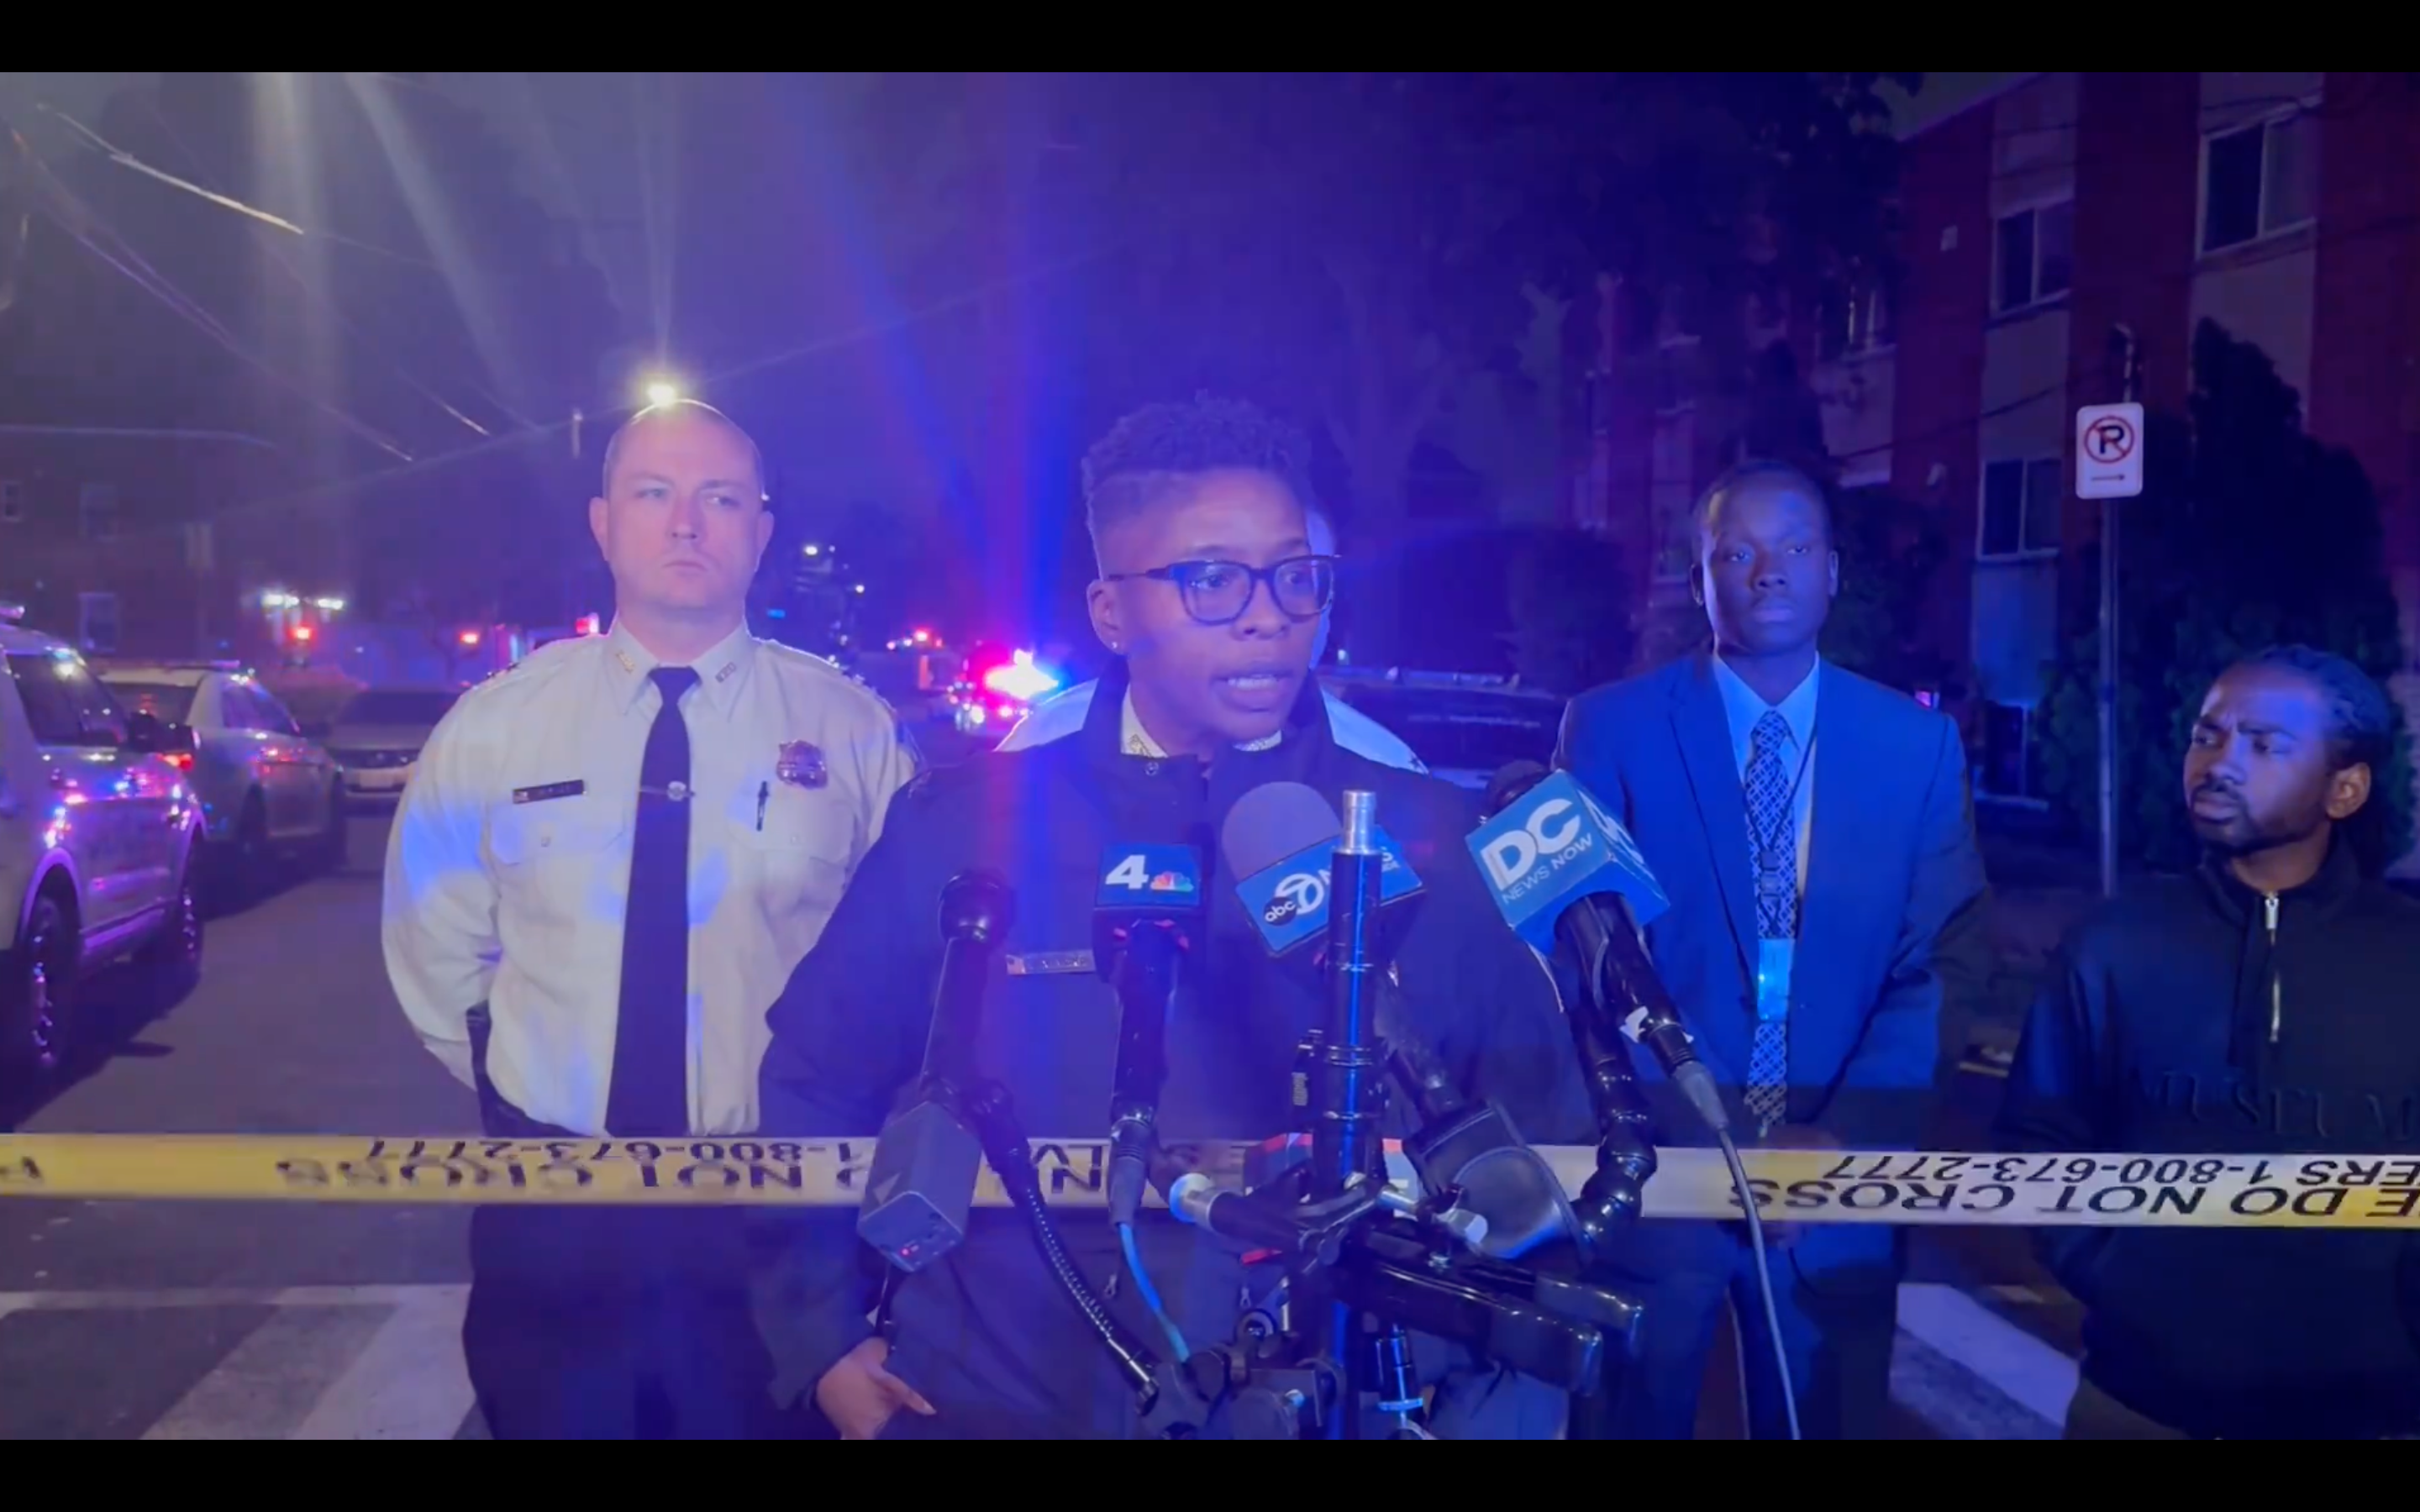 DC’s Metropolitan Police give press conference after 3-year-old killed